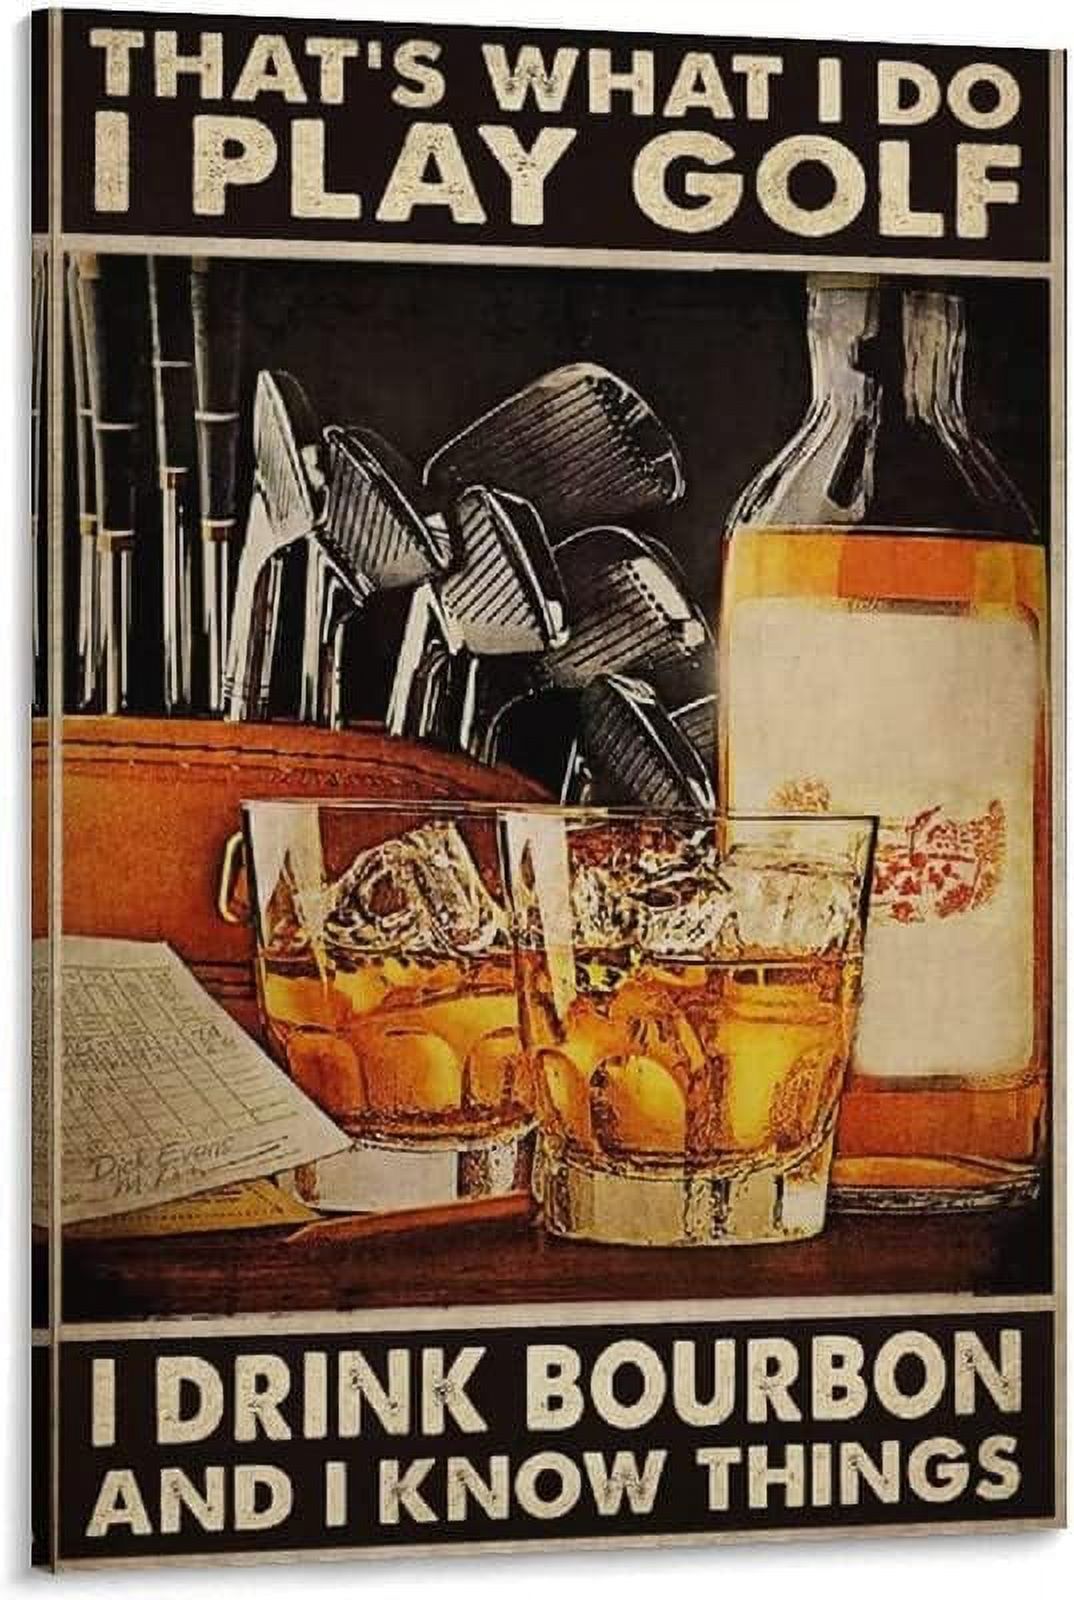 Fun Wooden 500 Piece Jigsaw Puzzle That's What I Do I Play Golf I Drink Bourbon and I Know Things Puzzle - Thanksgiving Christmas Birthday Adult Children's Intellectual Learning Toys - image 1 of 7